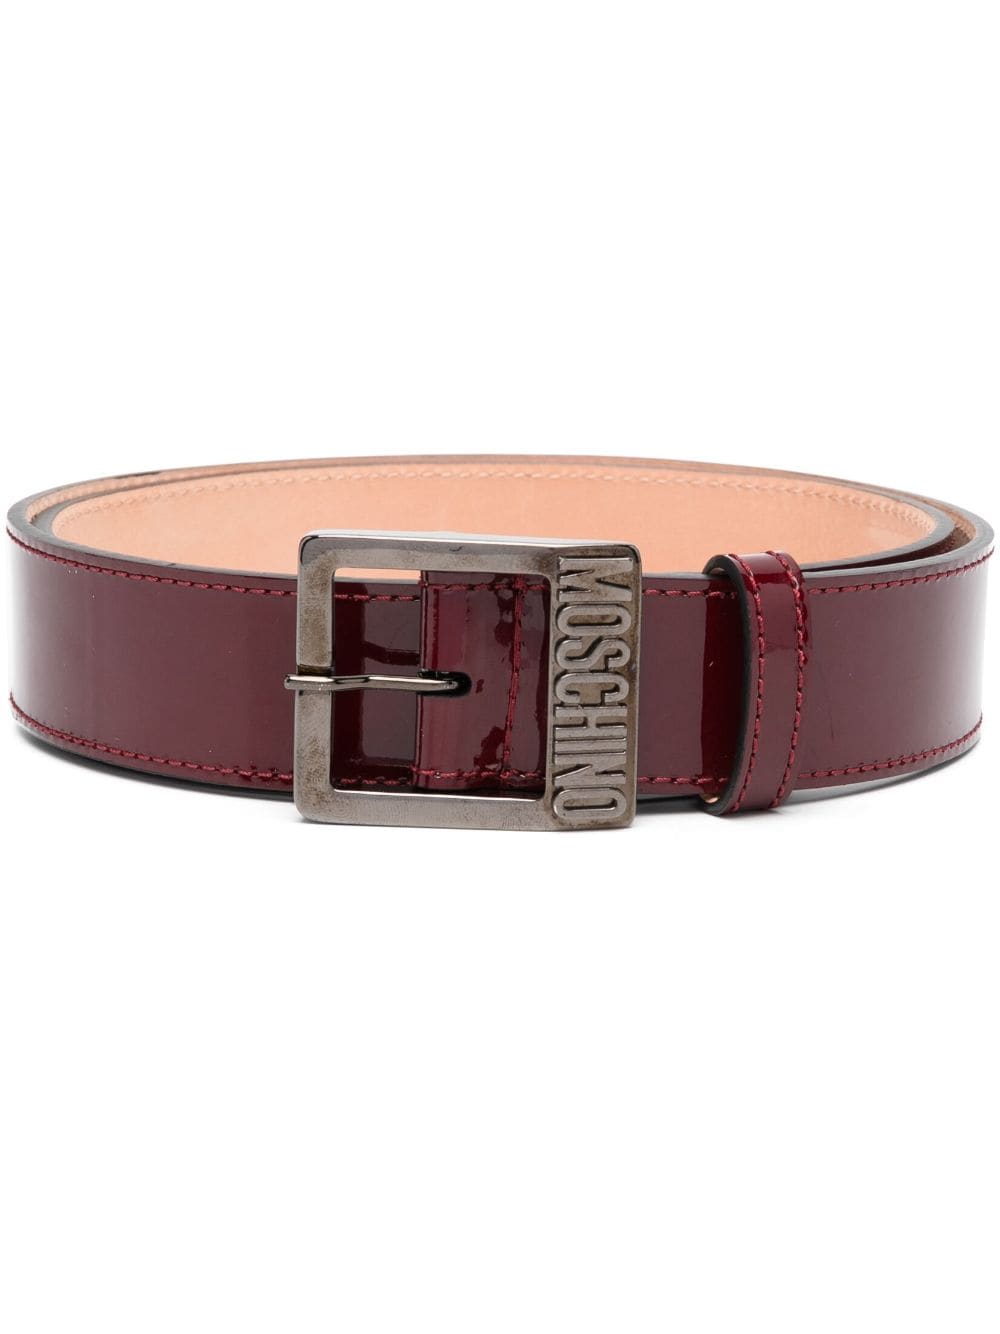 Moschino Patent Leather Belt In Brown